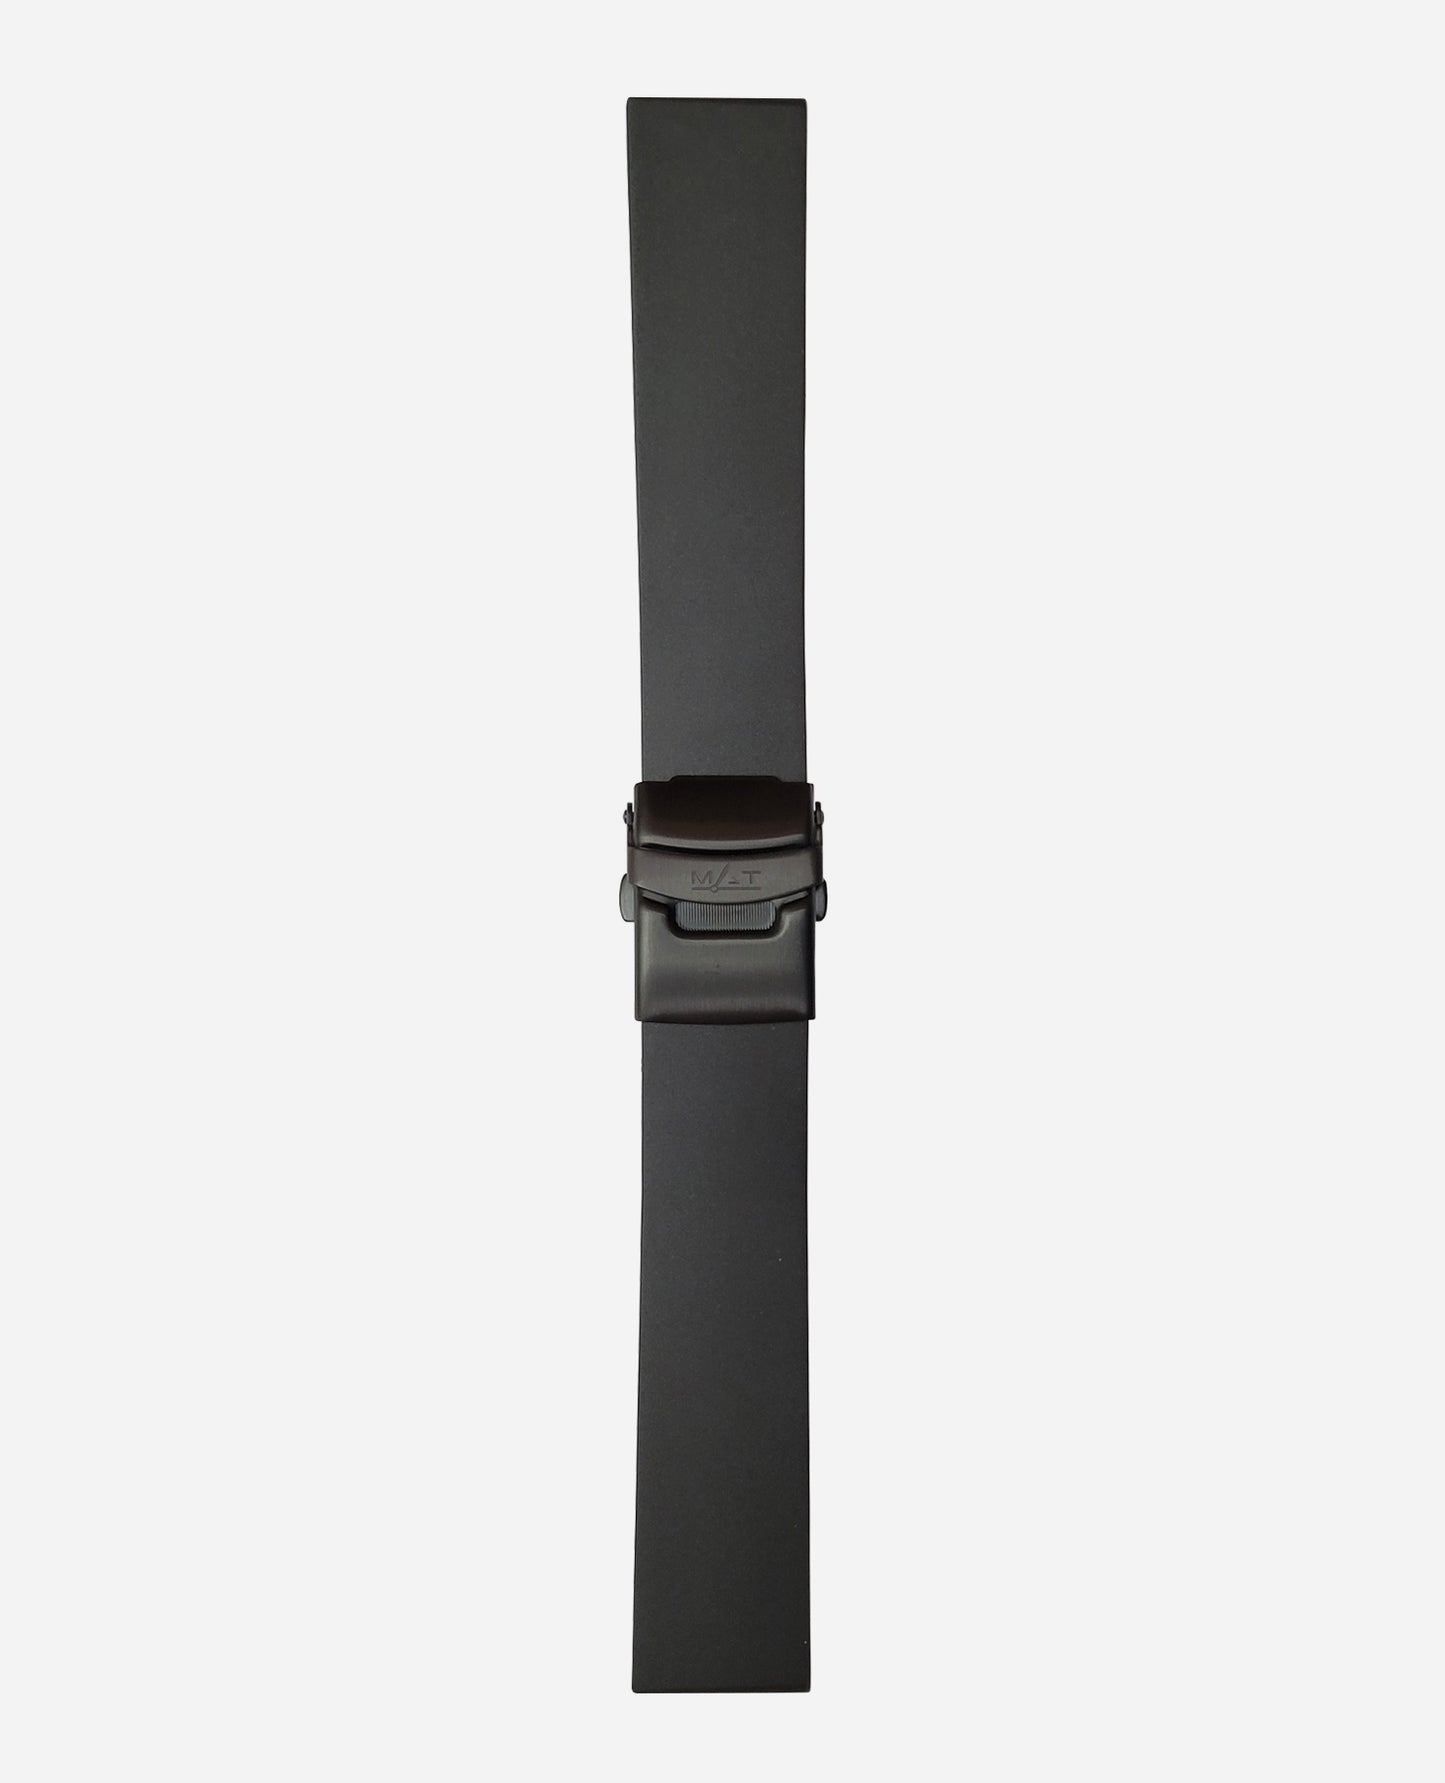 BLACK RUBBER 22 X 20 MM - CLASP BUCKLE